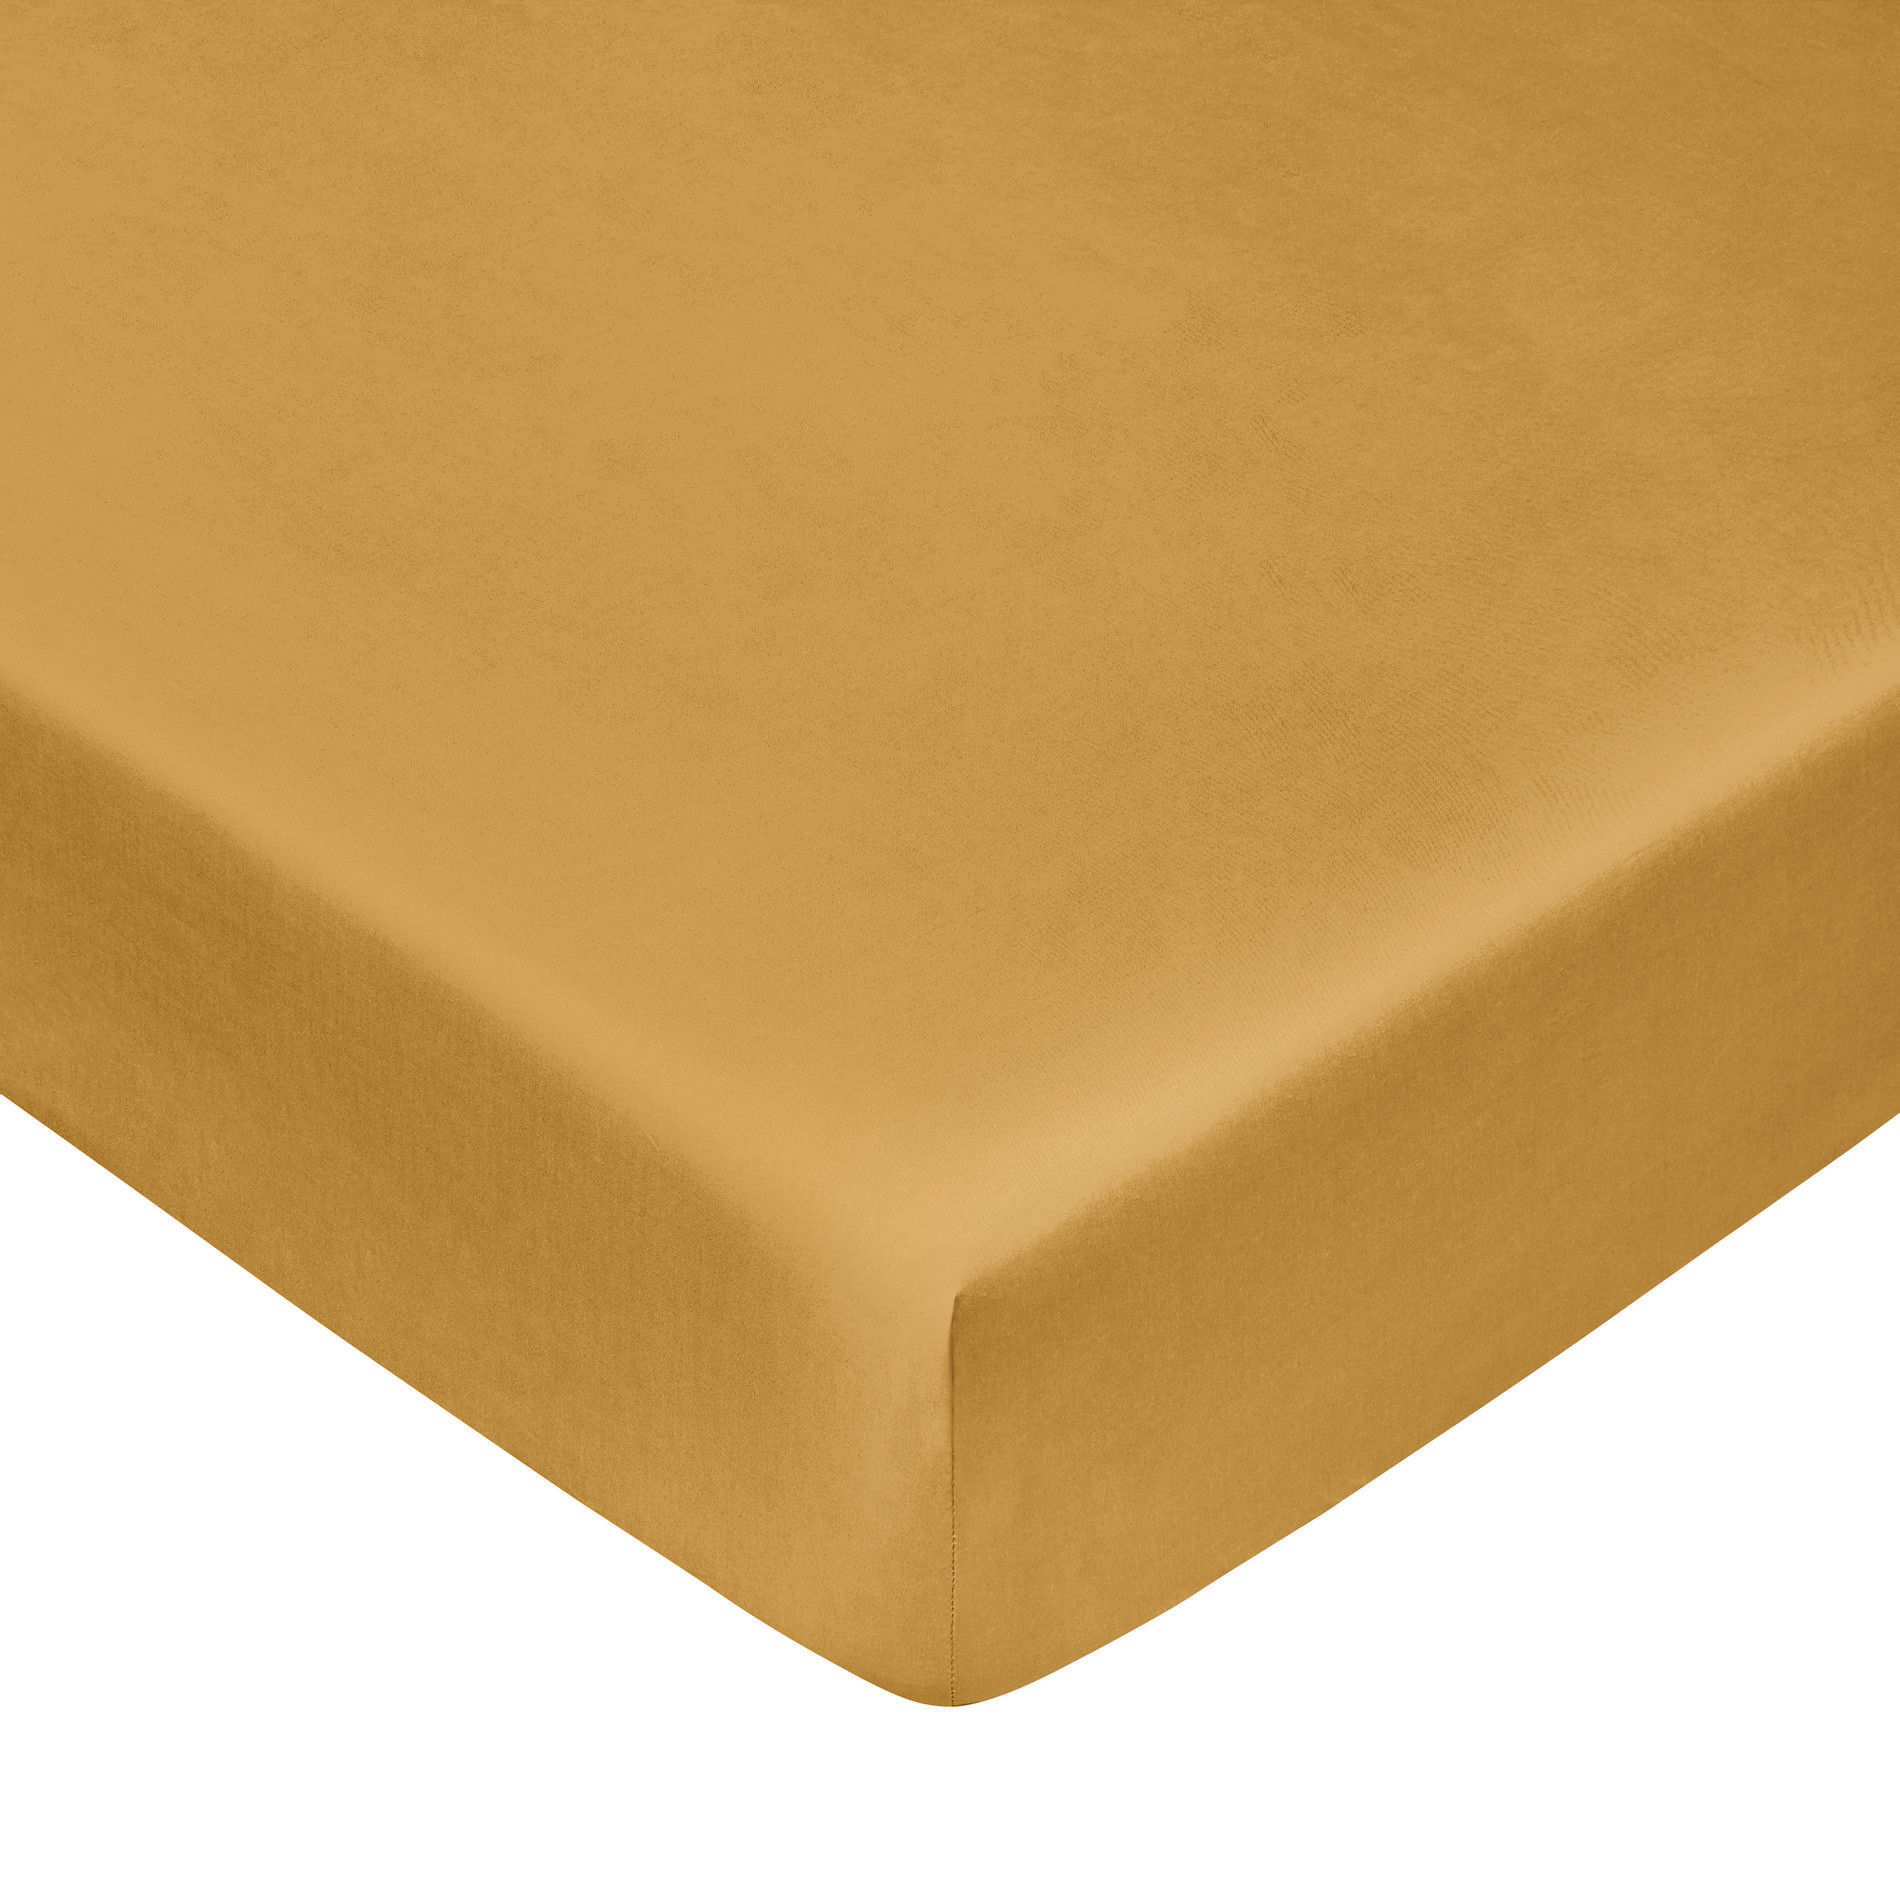 Zefiro solid colour fitted sheet in percale., Ocra Yellow, large image number 0